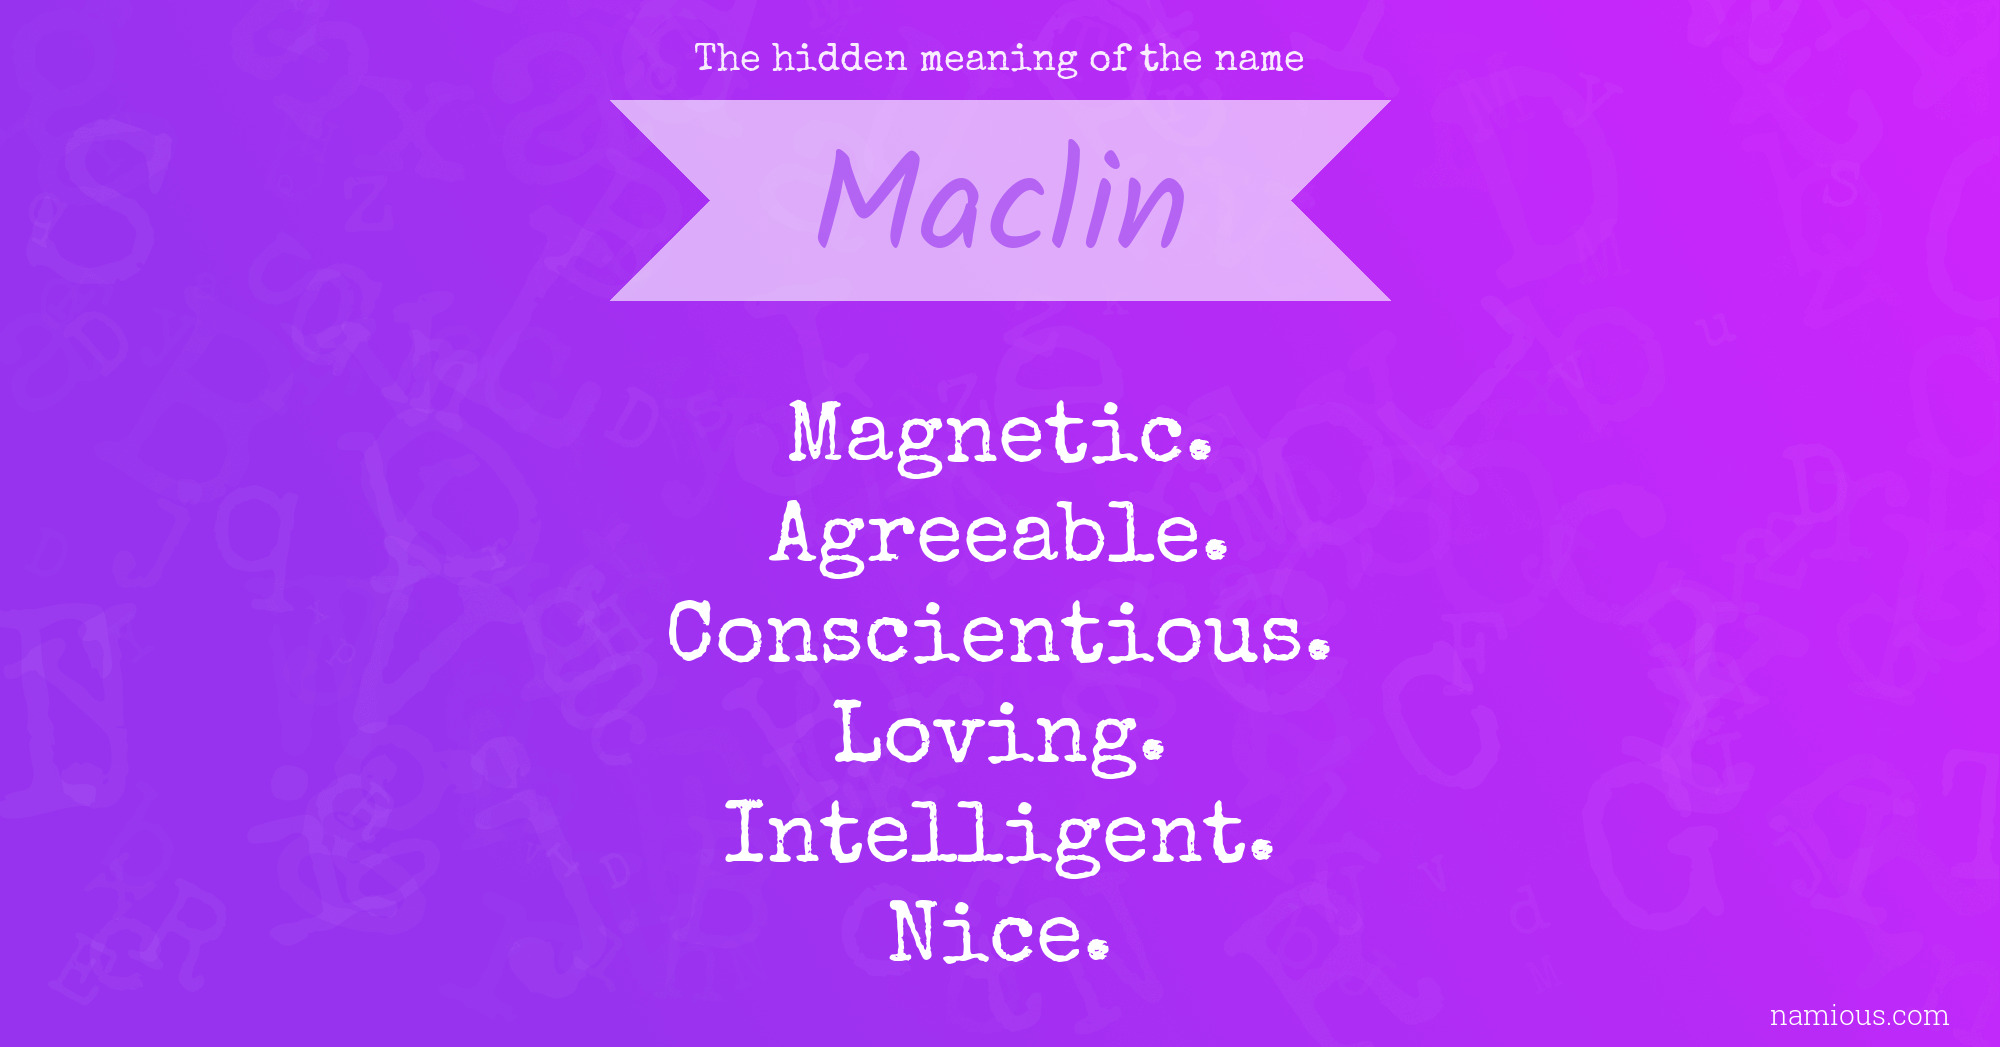 The hidden meaning of the name Maclin